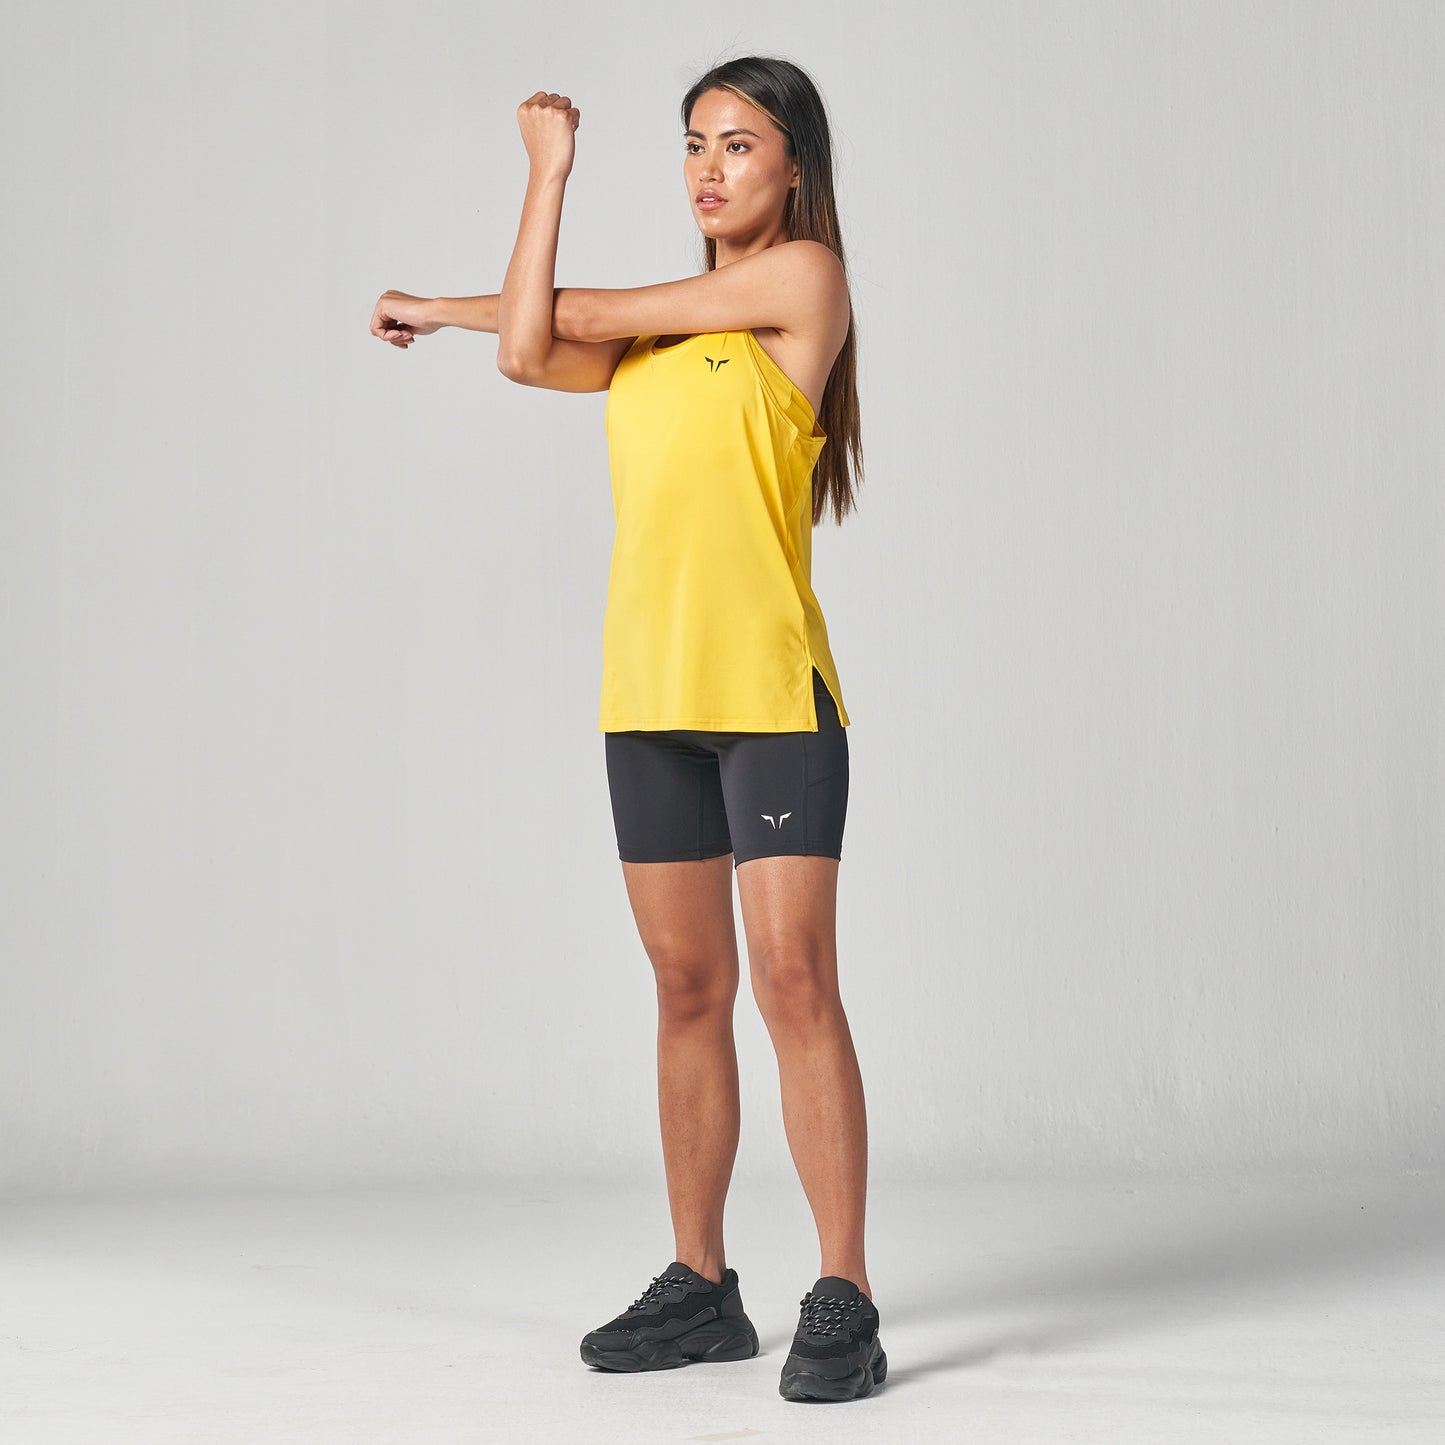 squatwolf-workout-clothes-essential-tank-top-yellow-gym-tank-tops-for-women